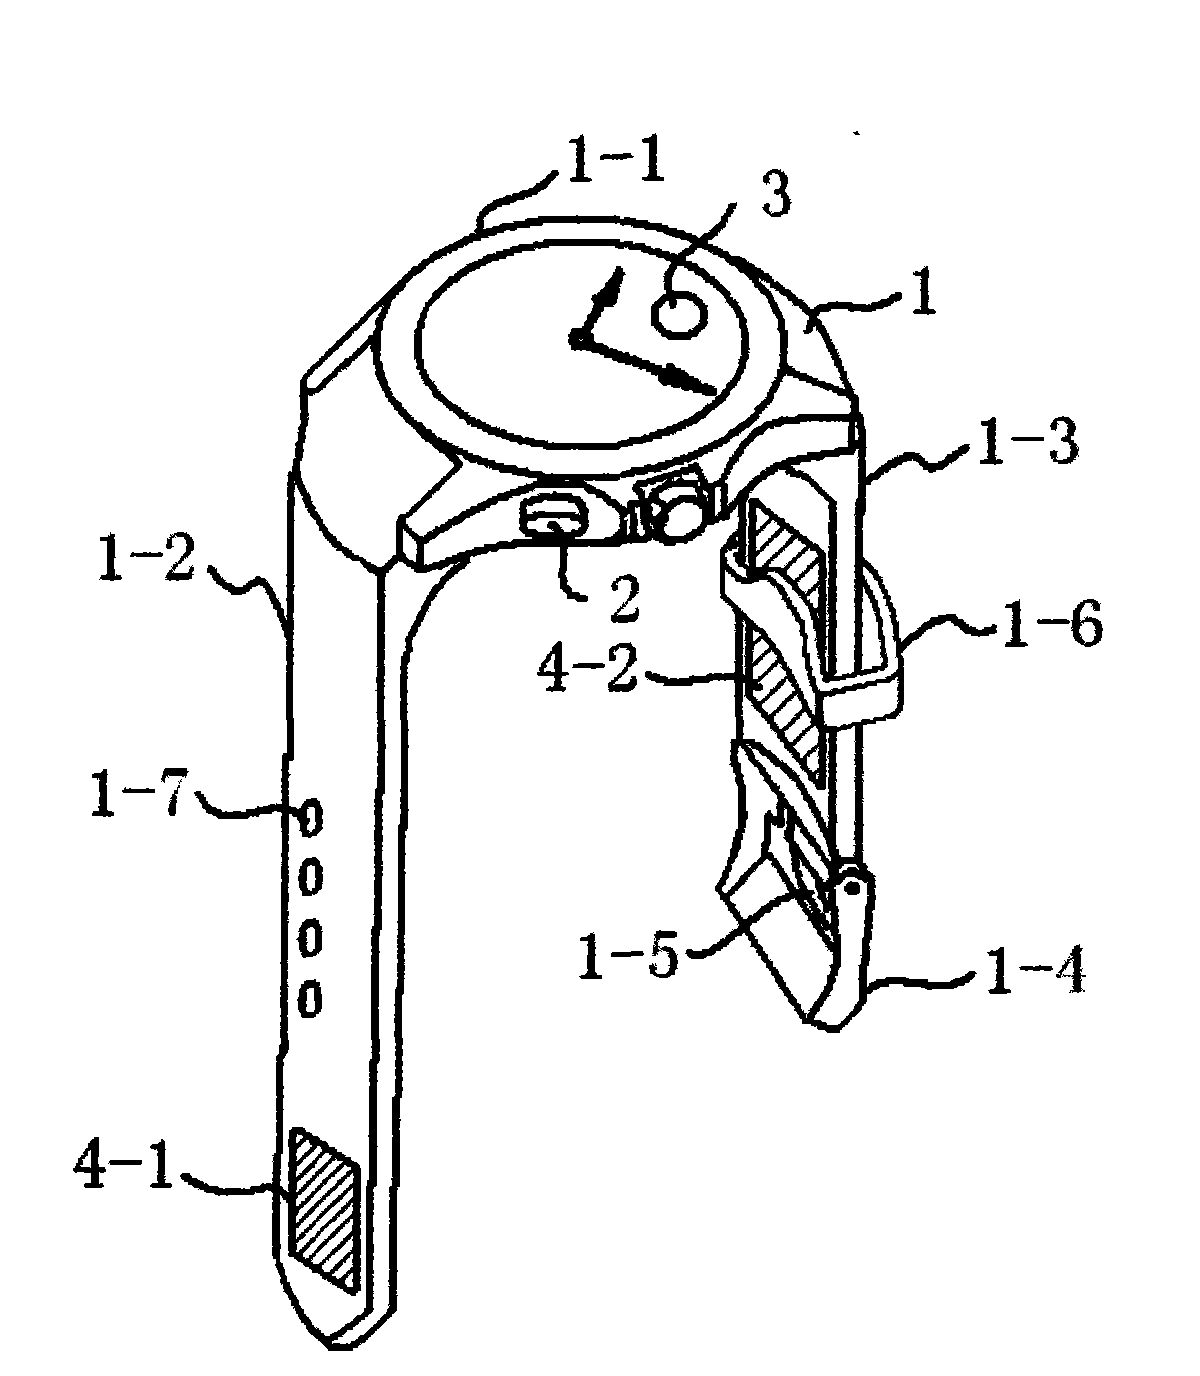 Wrist-wearing electronic identity device with vein identity verification function